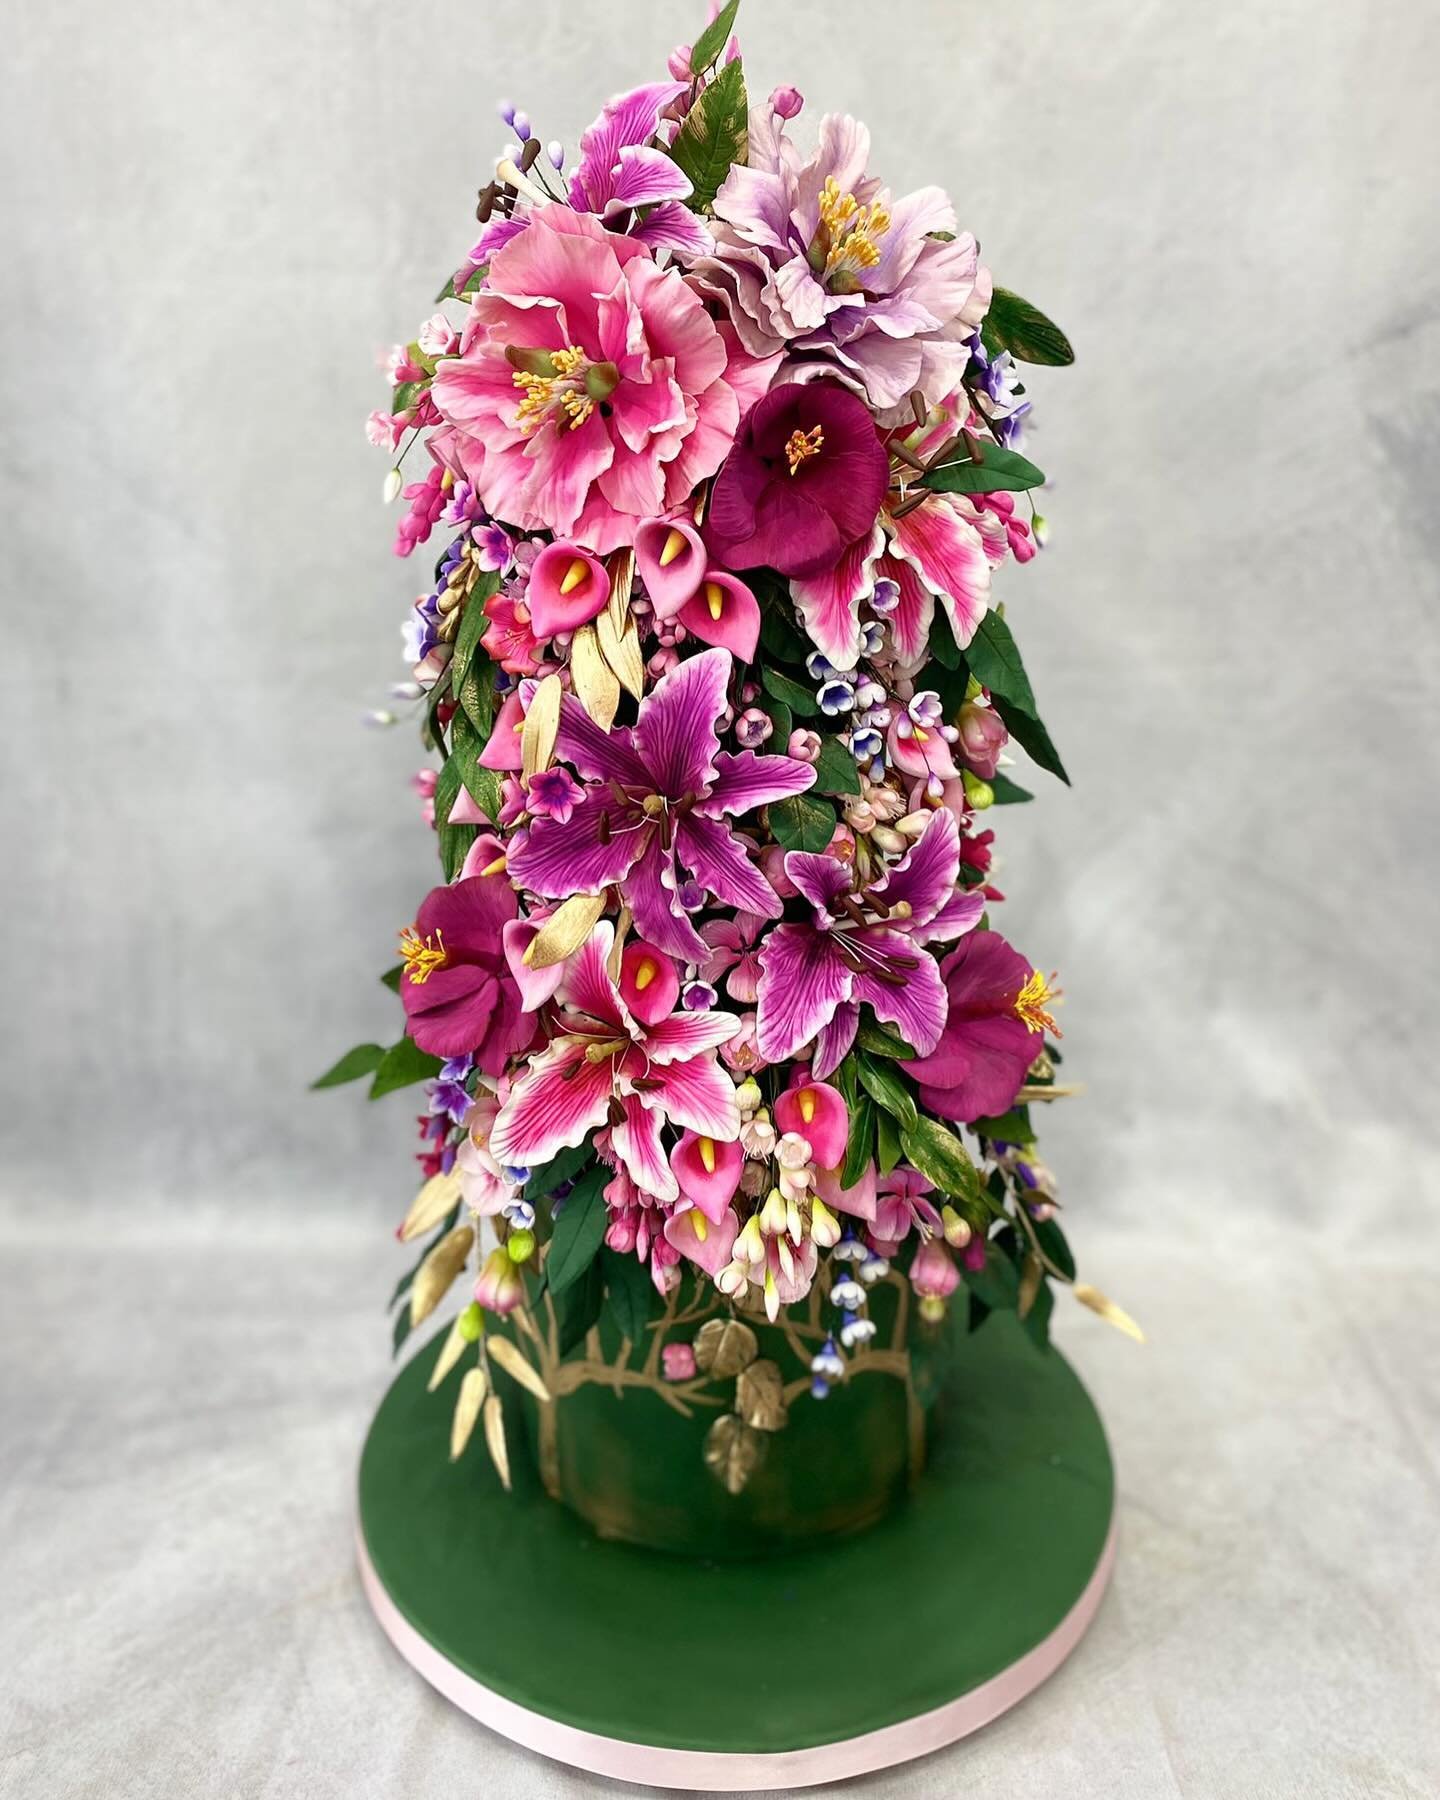 A super floral, colourful cake to compliment this beautiful sunny day ☀️💕

I will NEVER, EVER get enough of this one. This is of my all time faves. The cascade of sugar flowers was the result of hours and hours and hours of work. 

LOVE 🩷💜

Made f